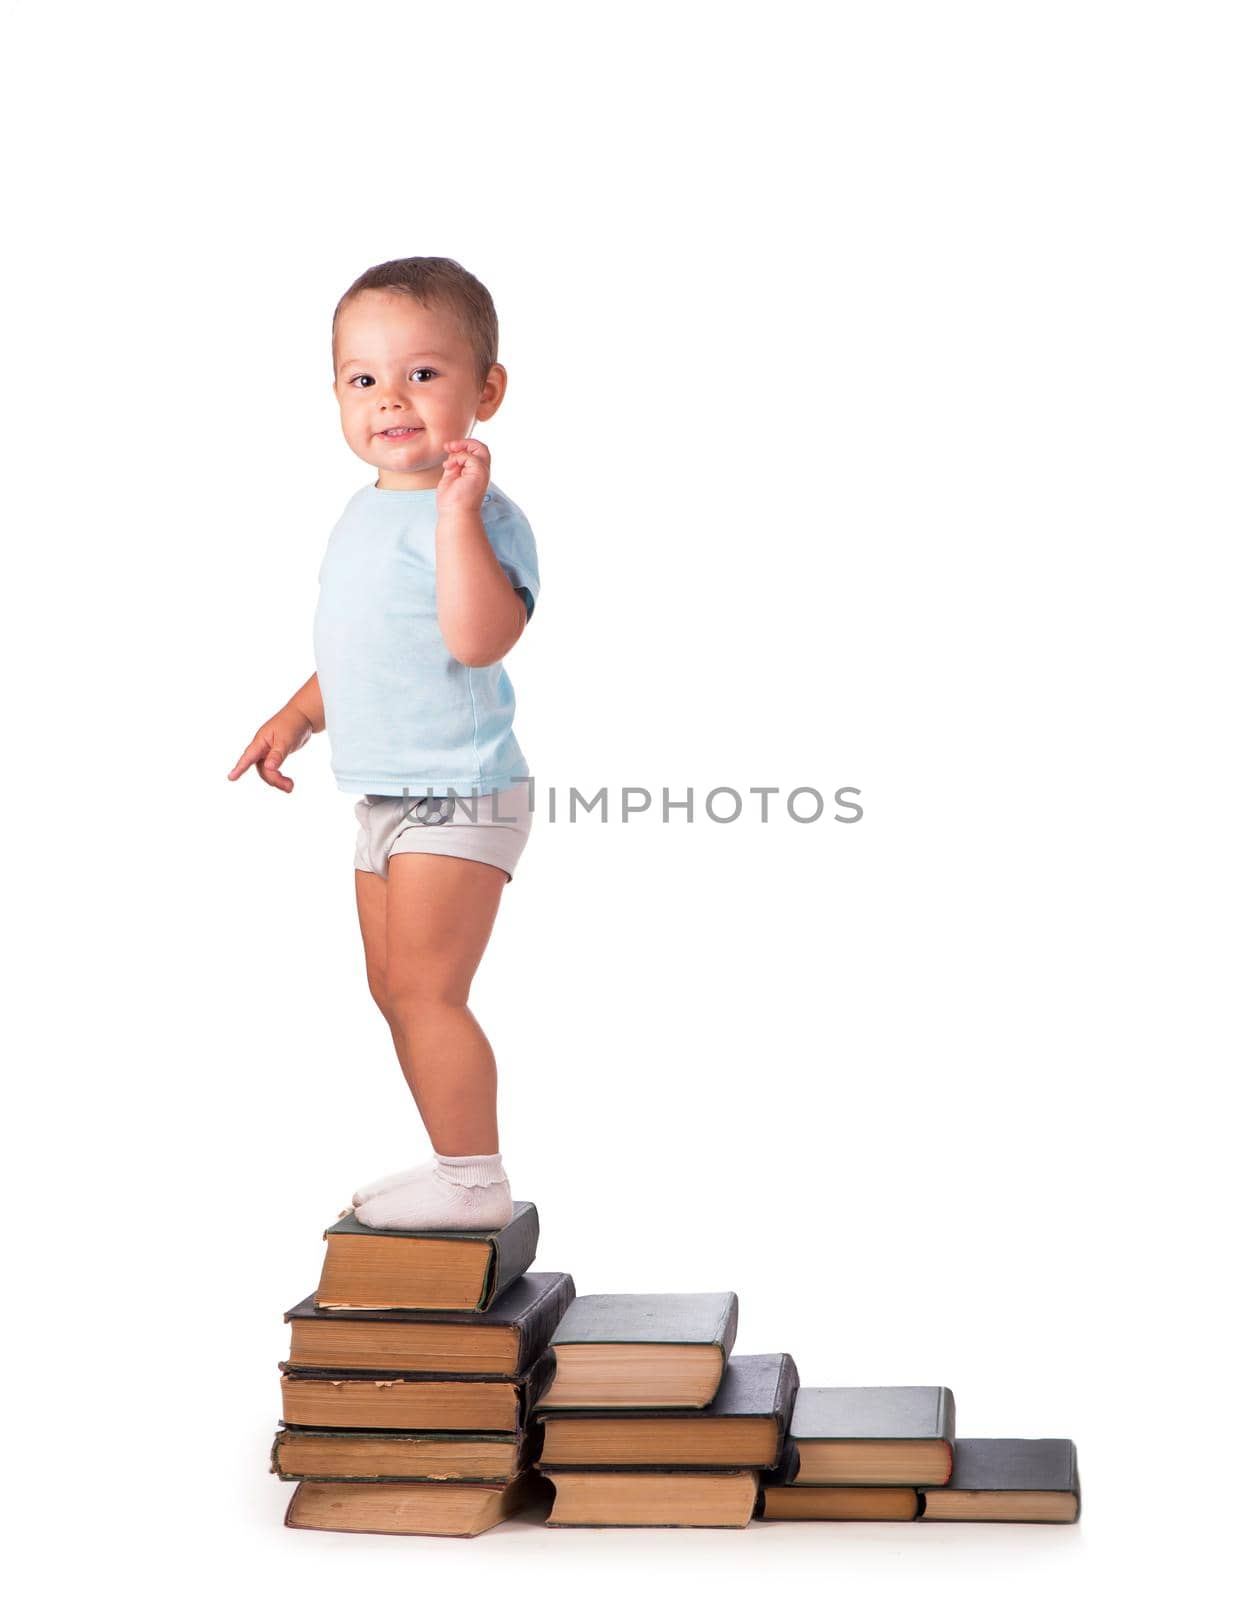 Boy with books for an education portrait - isolated over a white background